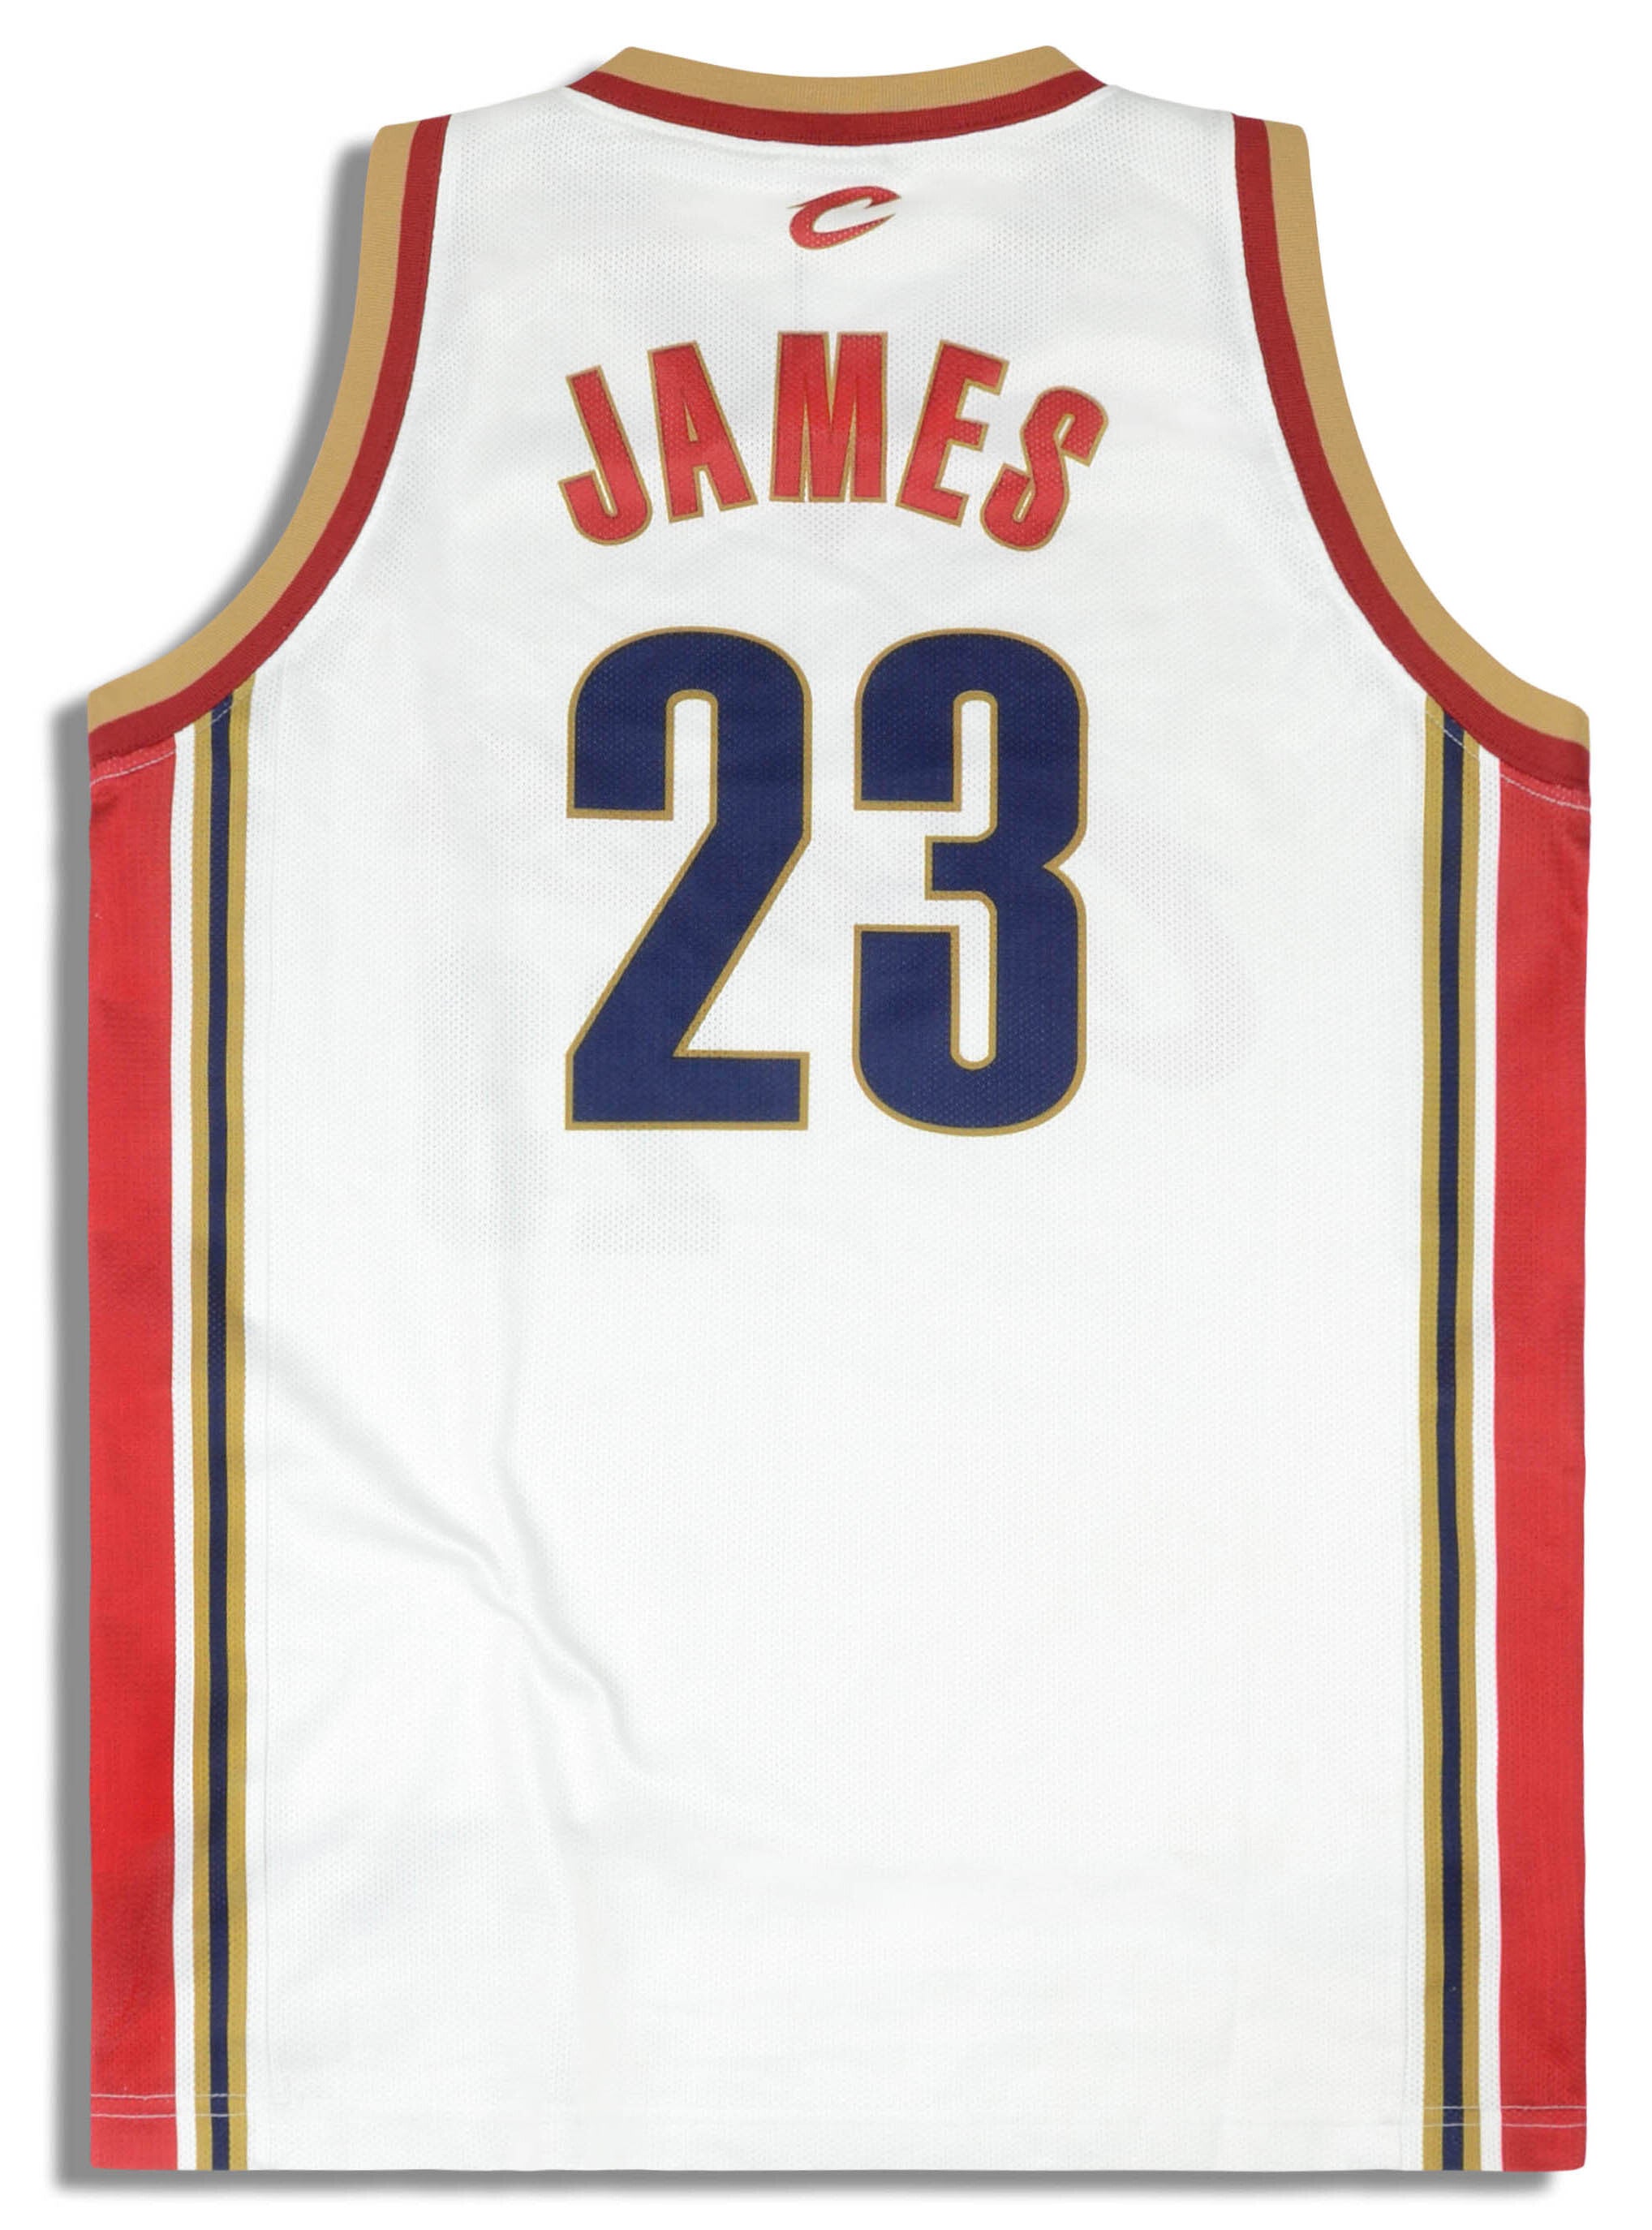 2003-10 CLEVELAND CAVALIERS JAMES #23 CHAMPION JERSEY (HOME) M